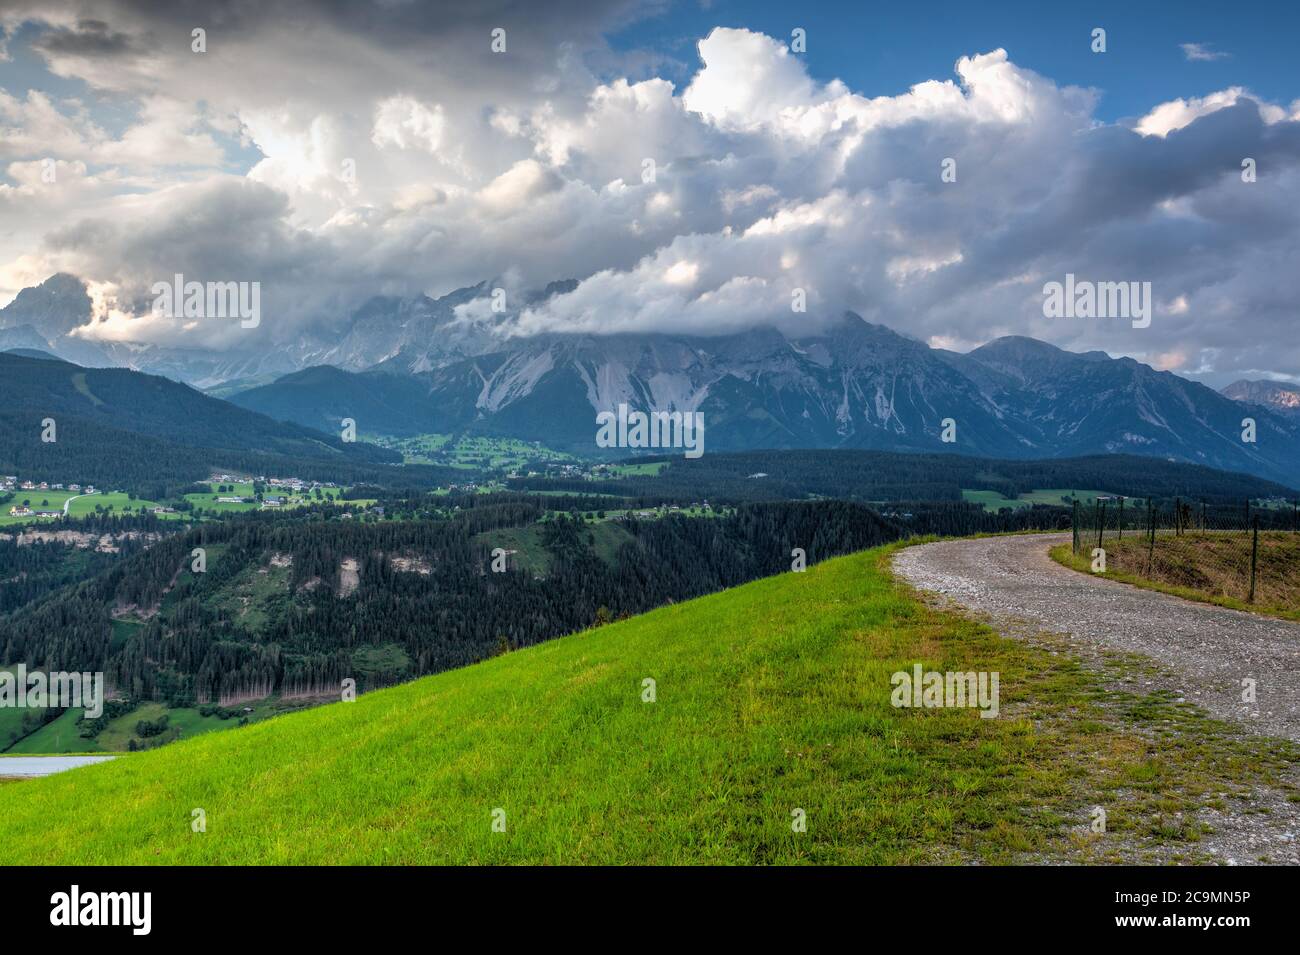 Dachstein mountain and summer valley views from Rohrmoos-Untertal, Austria. Rohrmoos-Untertal is a rural district known as a winter sports resort. Stock Photo